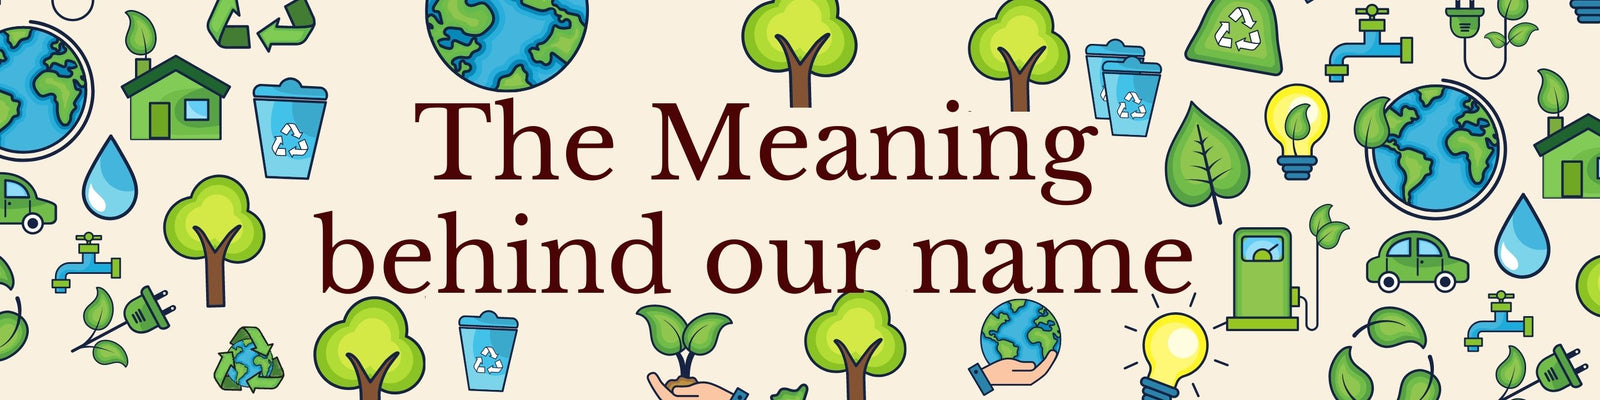 Banner introducing the meaning behind the Eden Tree Eco name.  Images of energy efficiency and green eco-friendly nature.